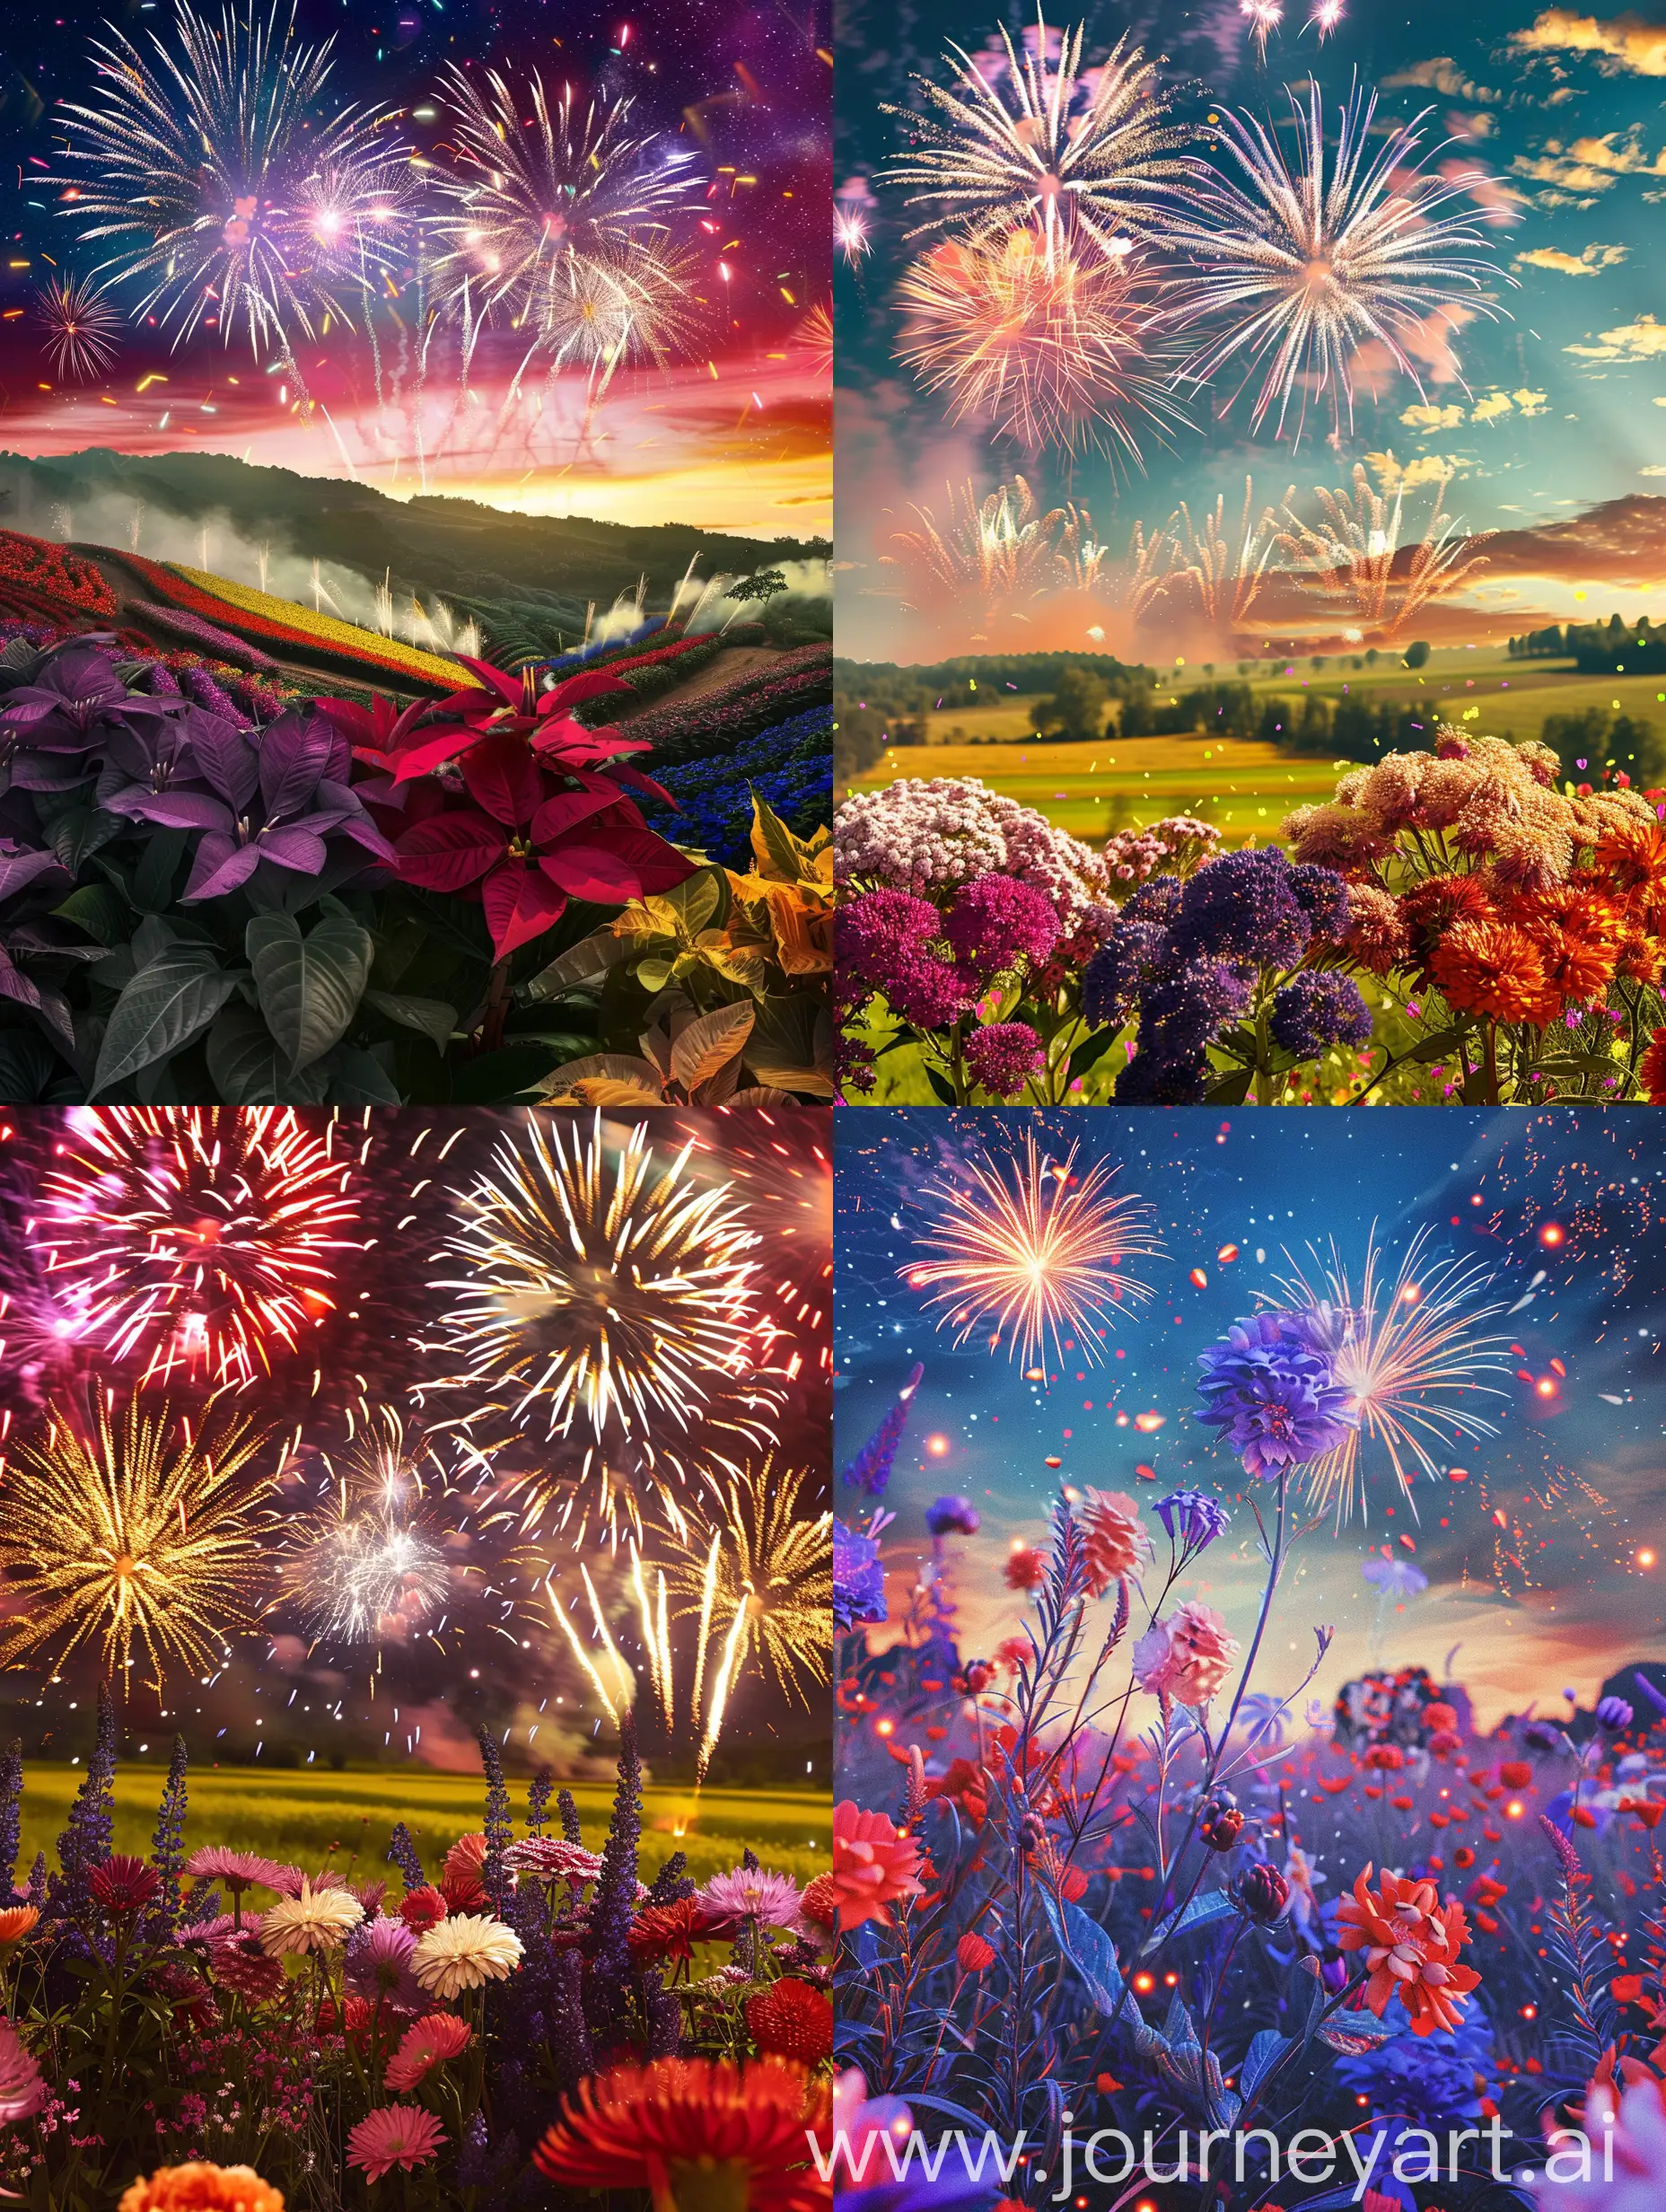 A holiday, fireworks in the sky, lush flowers in the foreground, a field of bright colors, foto